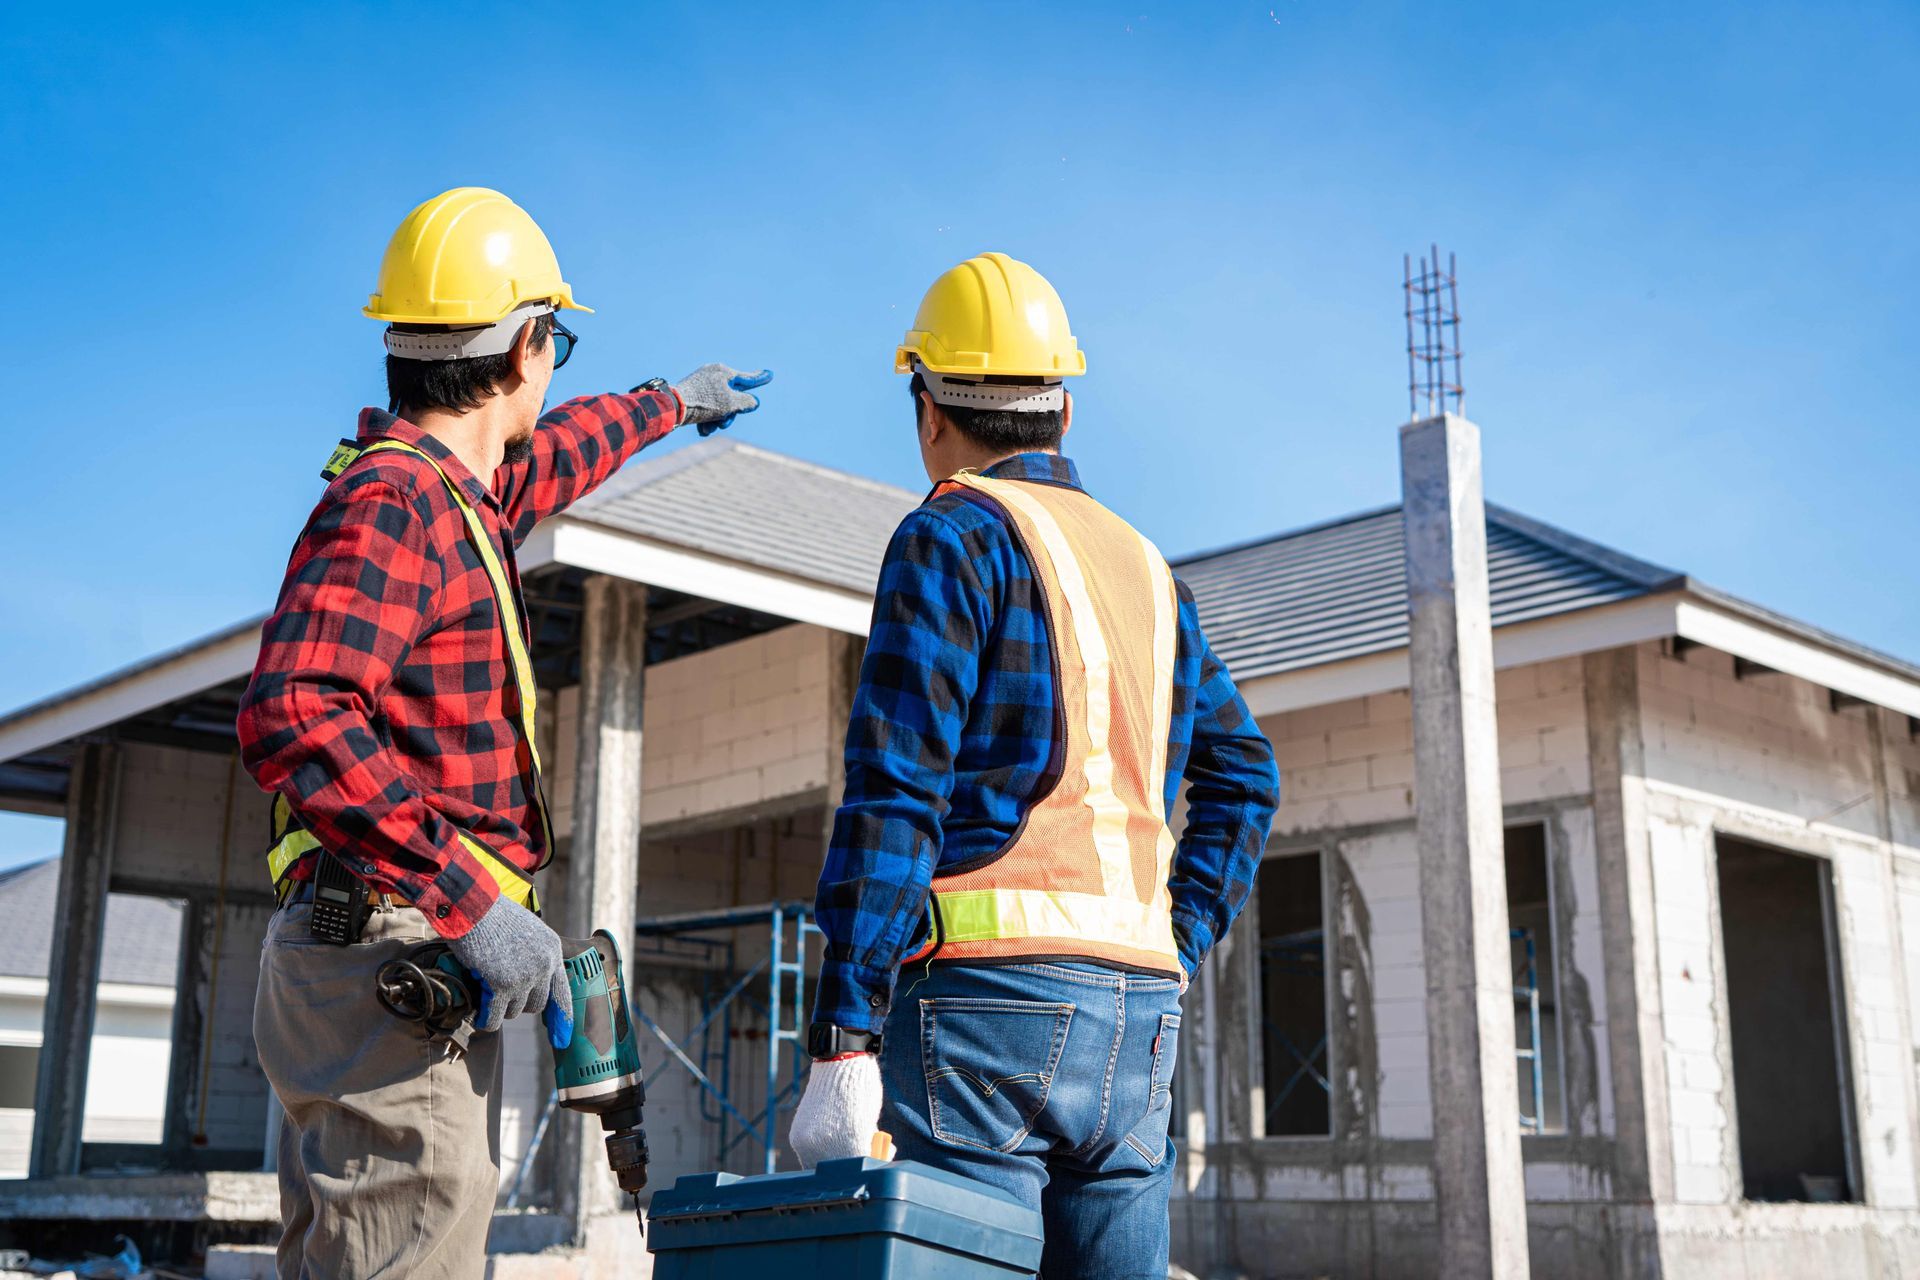 Two construction workers are standing in front of a house under construction